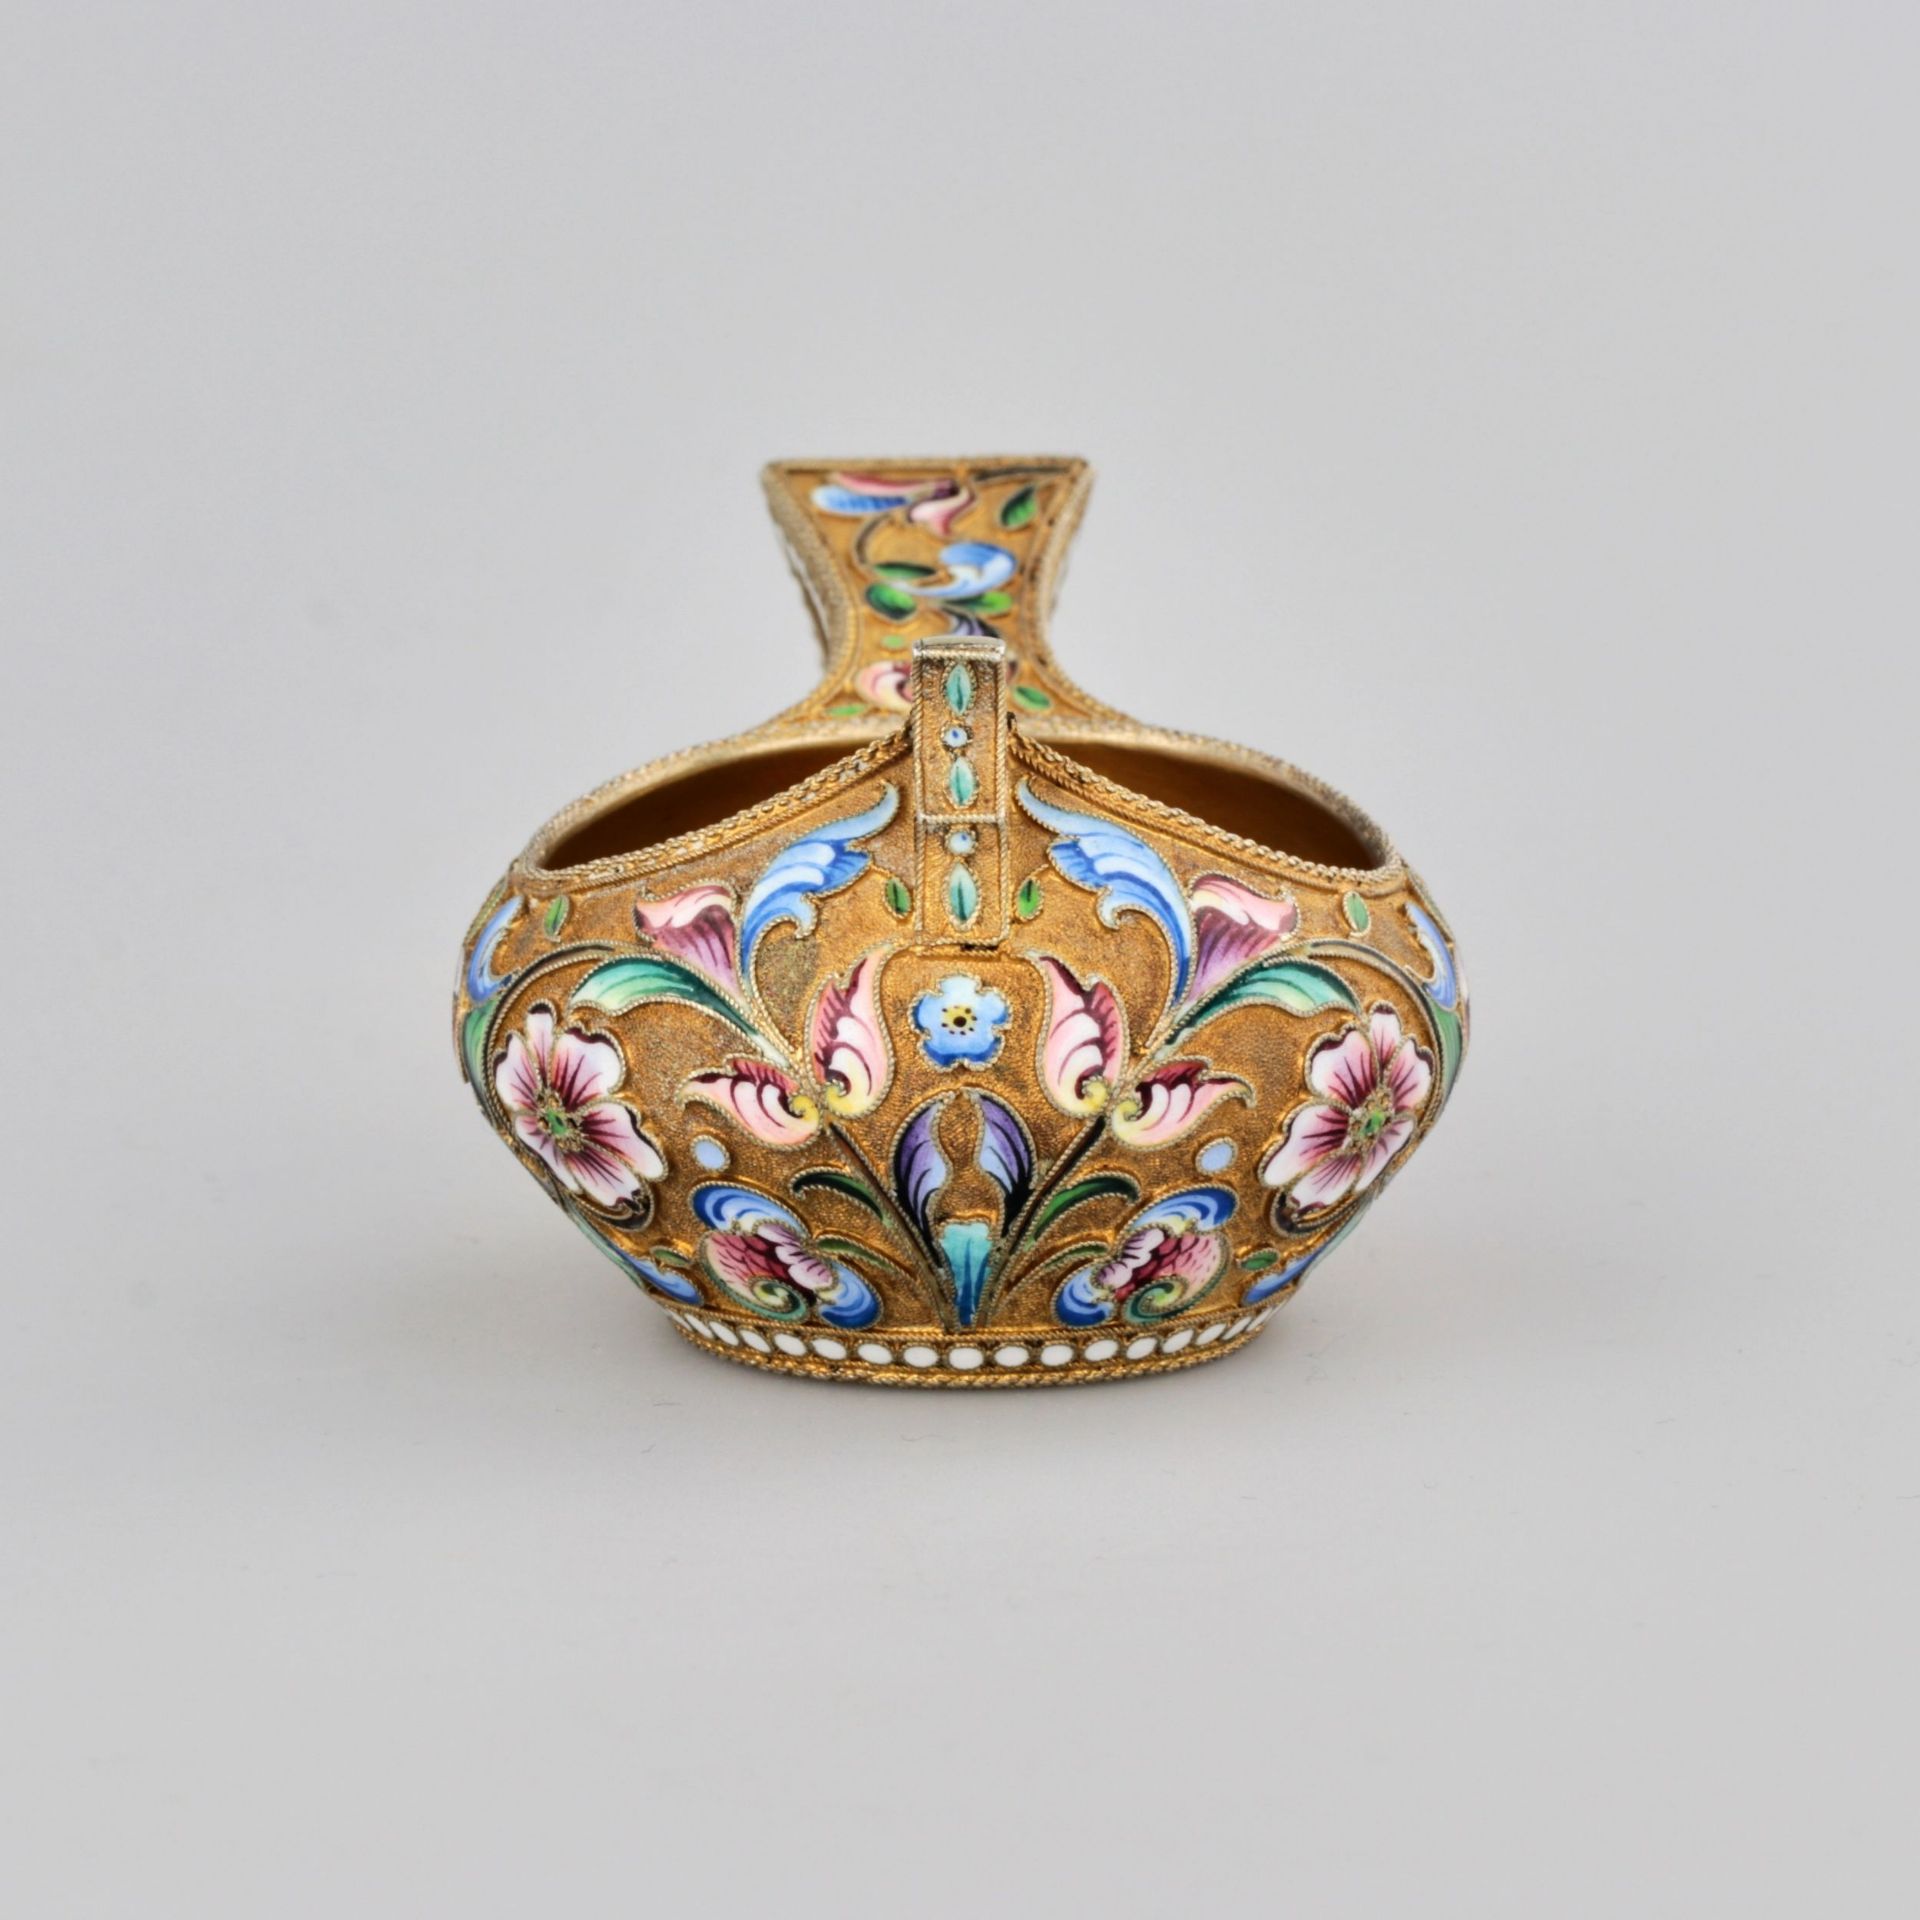 Decorative kovsh in Russian style with enamel. - Image 3 of 6